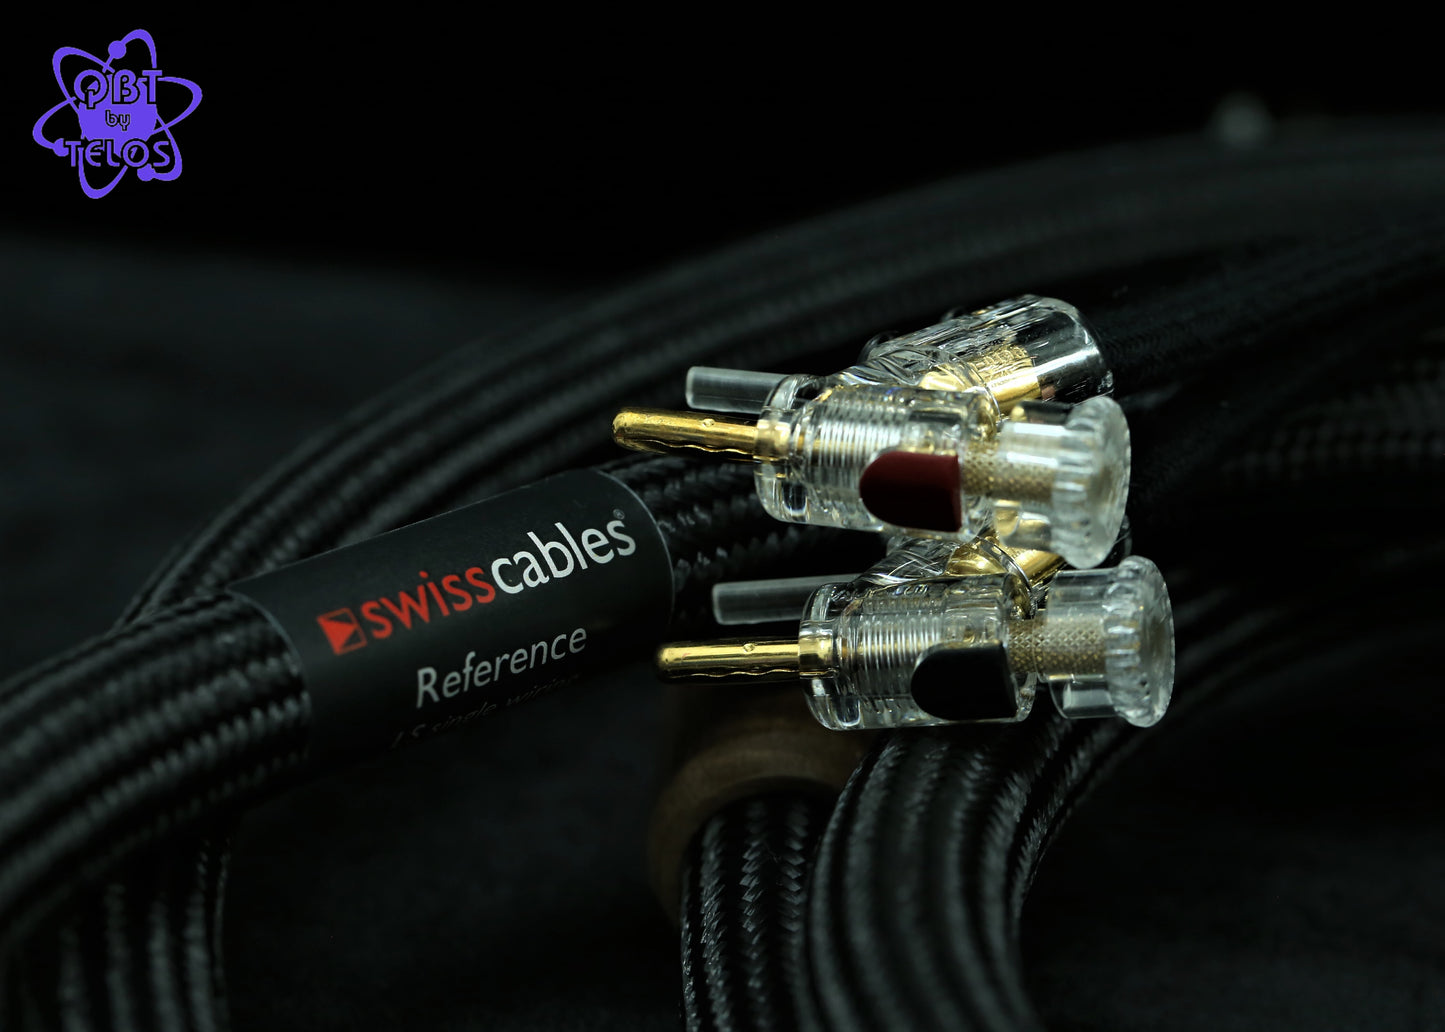 Swisscables Reference Speaker Cables